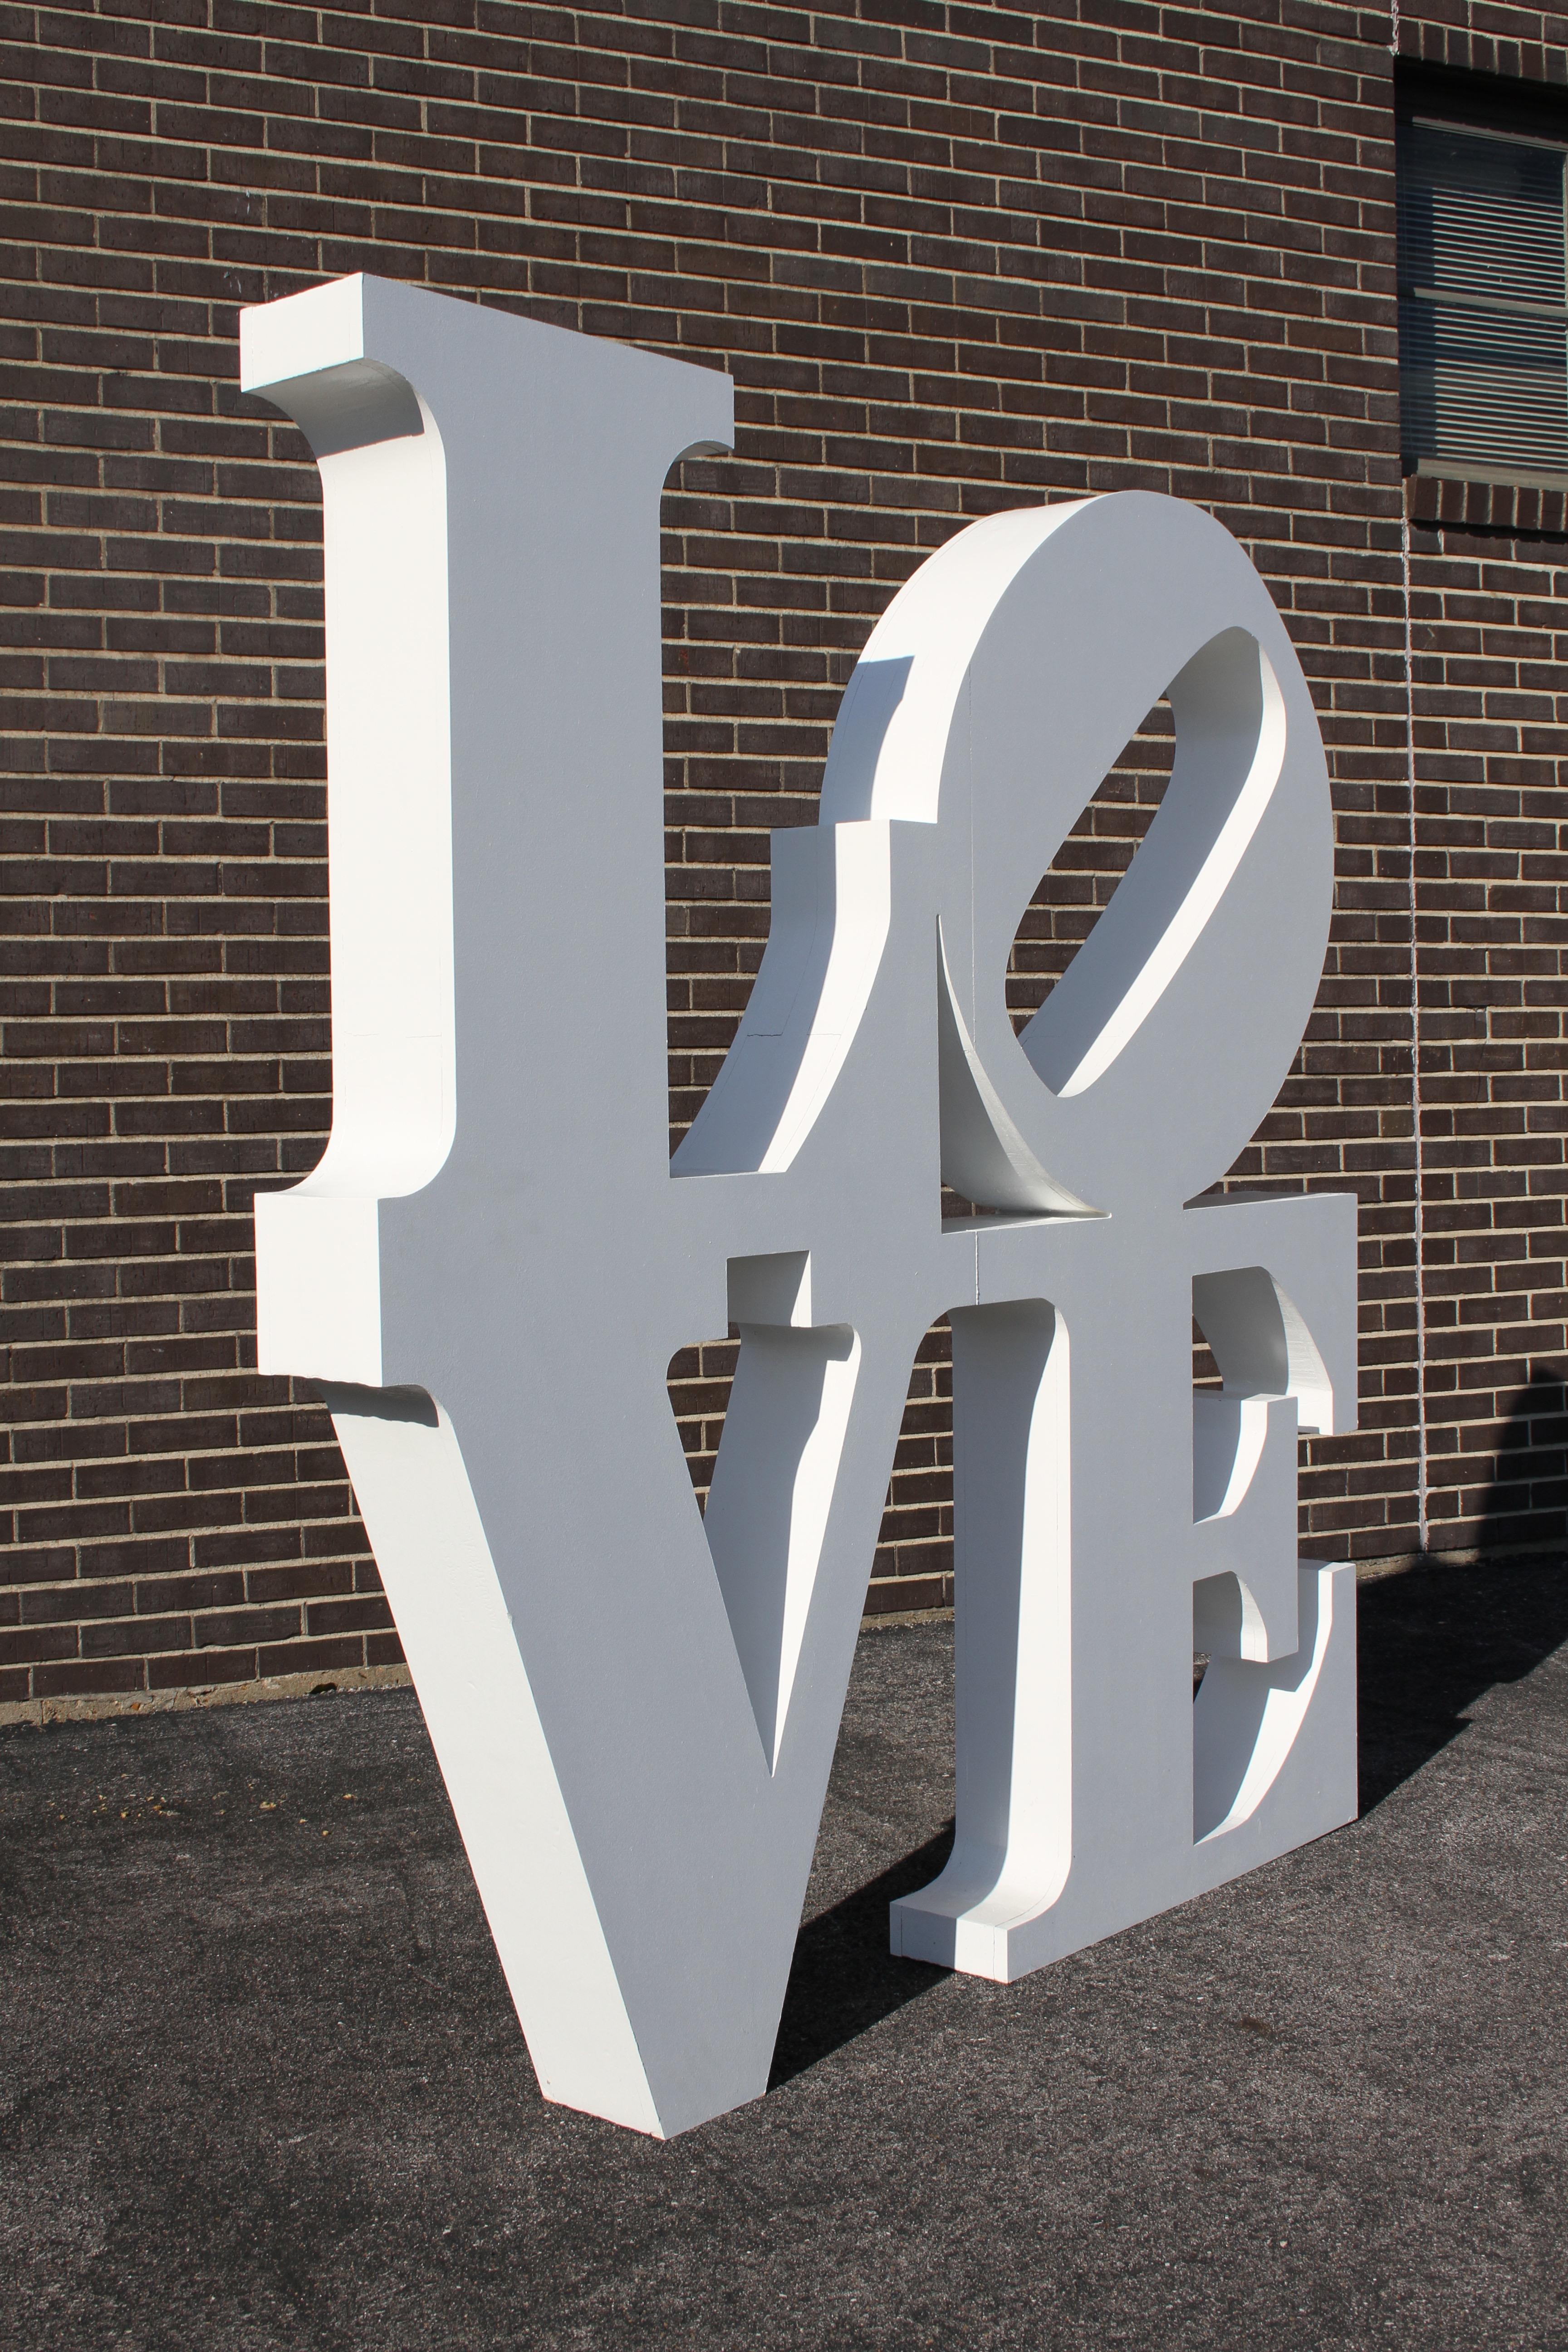 After Robert Indiana iconic large 6' x 6' LOVE pop art sculpture. This sculpture was custom-made for a wedding, can be used as art in a home, display for a store or a prop. It is made of MDF on the outside and rigid foam on the inside. It has been